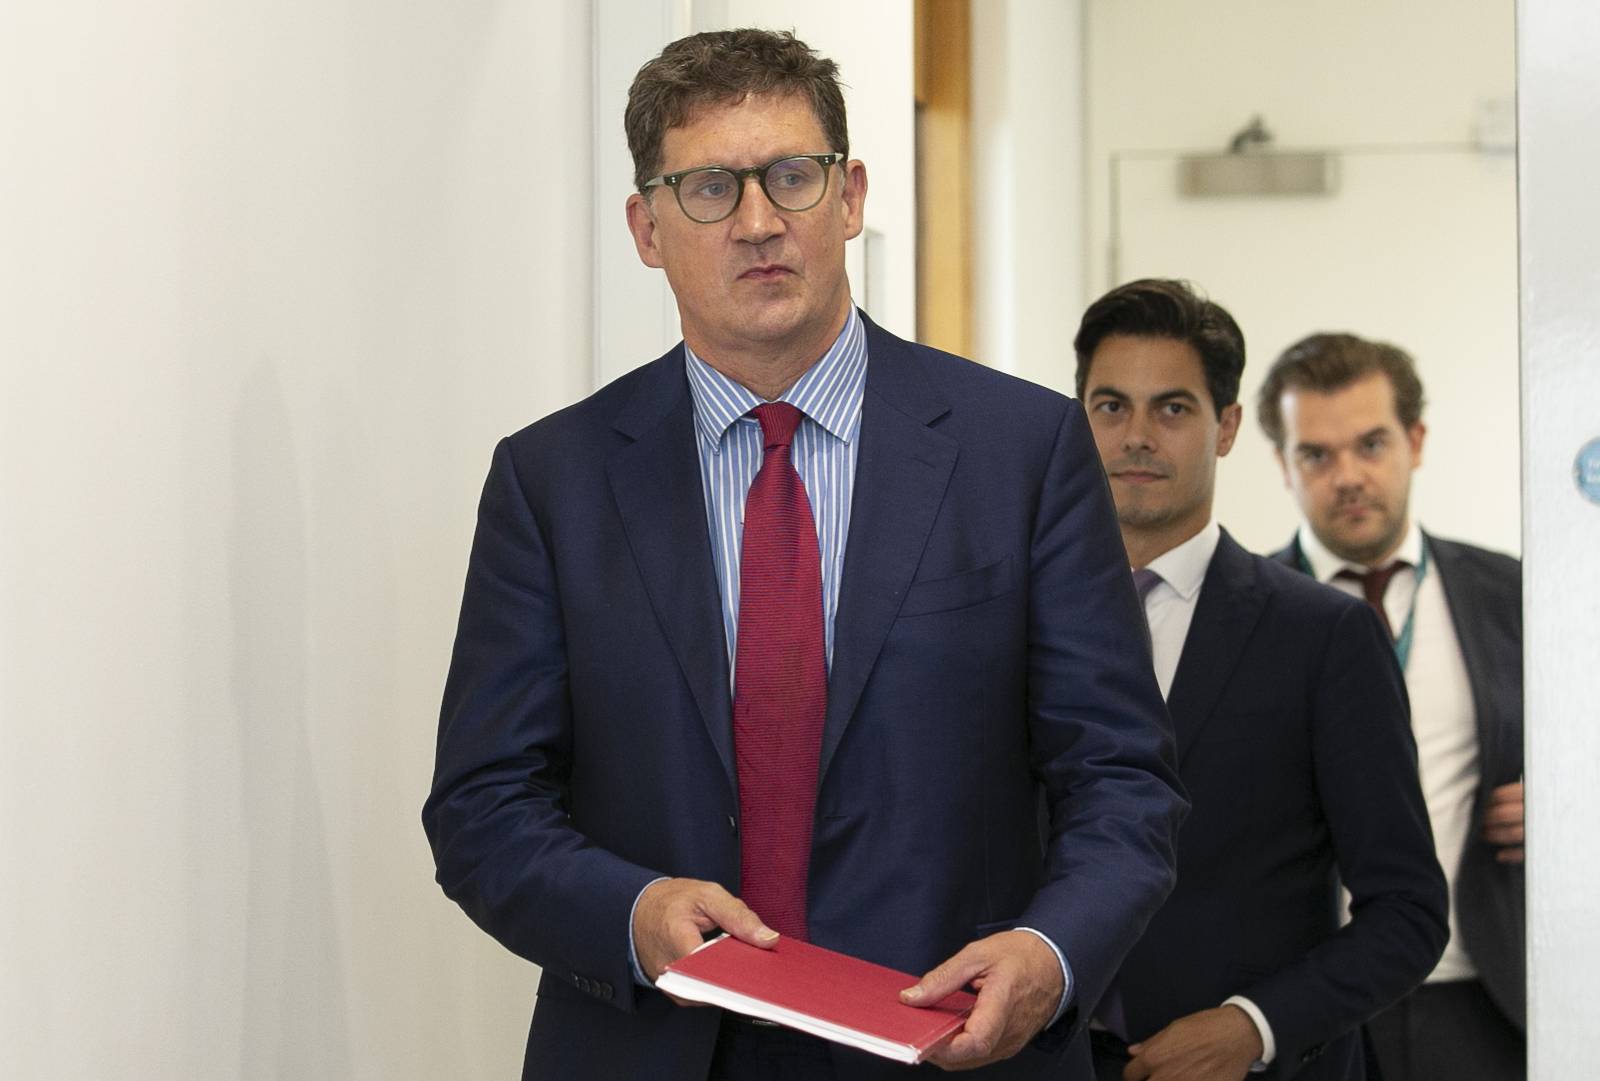 Minister for the Environment Eamon Ryan during a meeting by members of the North Seas Energy Cooperation (NSEC) and the the European Commission to accelerate Europe’s move towards energy independence at The Commissioners of Irish Lights in Dublin. Photograph: Gareth Chaney/Collins